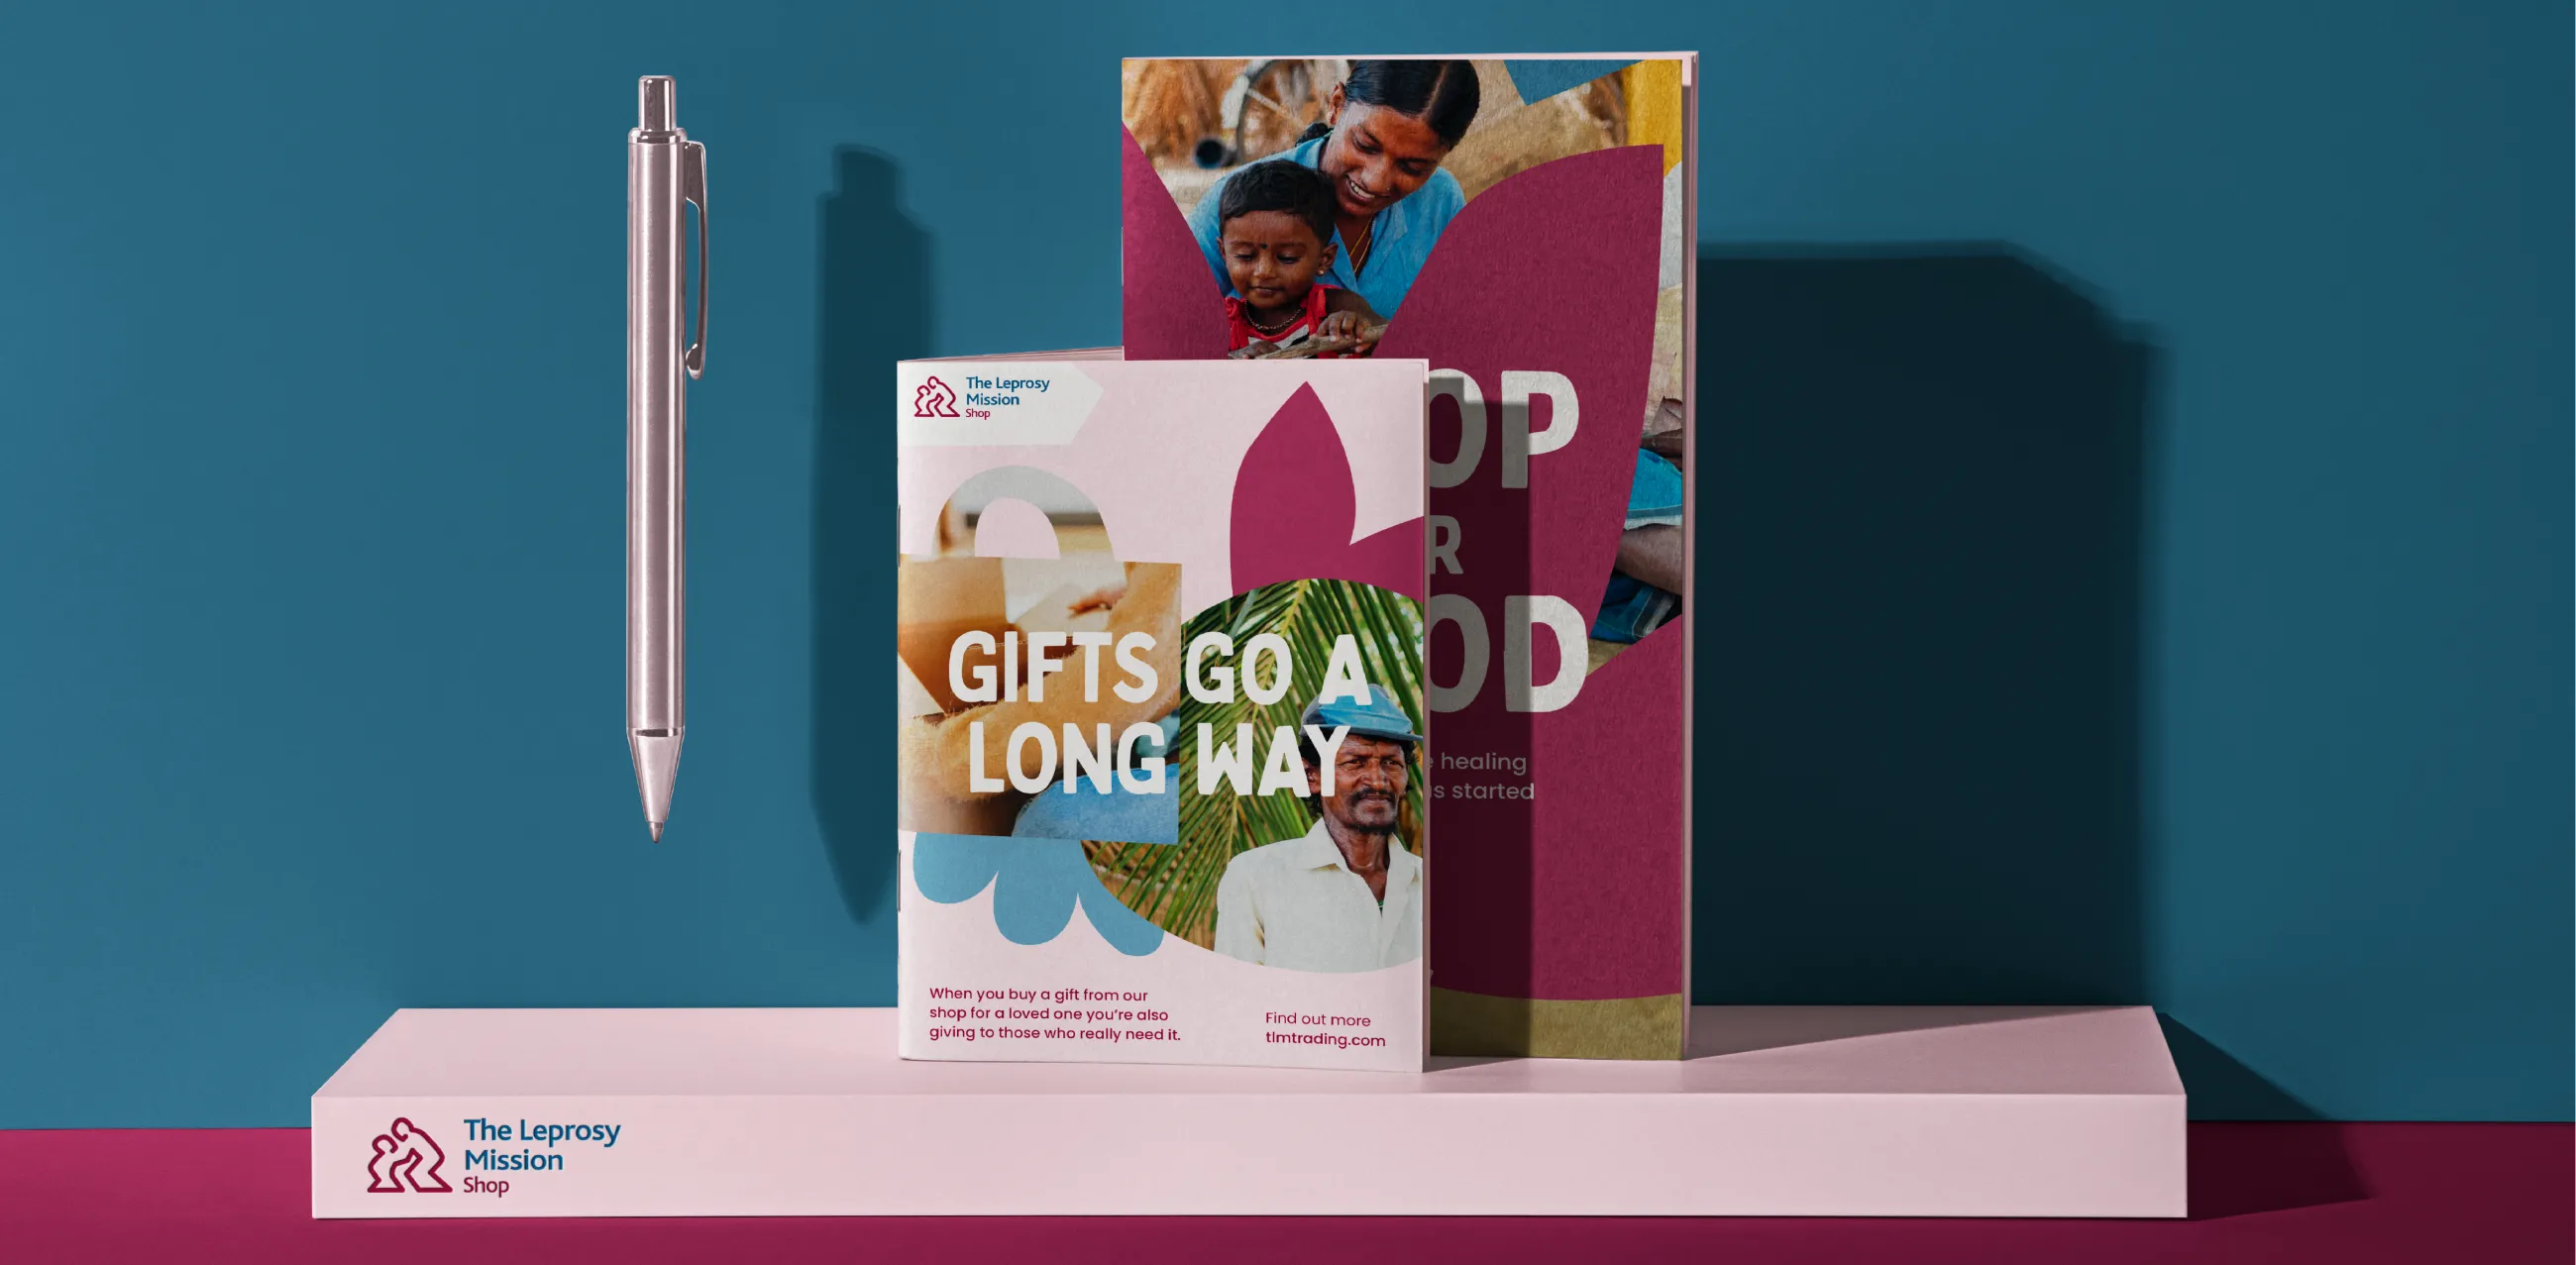 Leprosy Mission Shop branded gift catalogue, brochure and pen